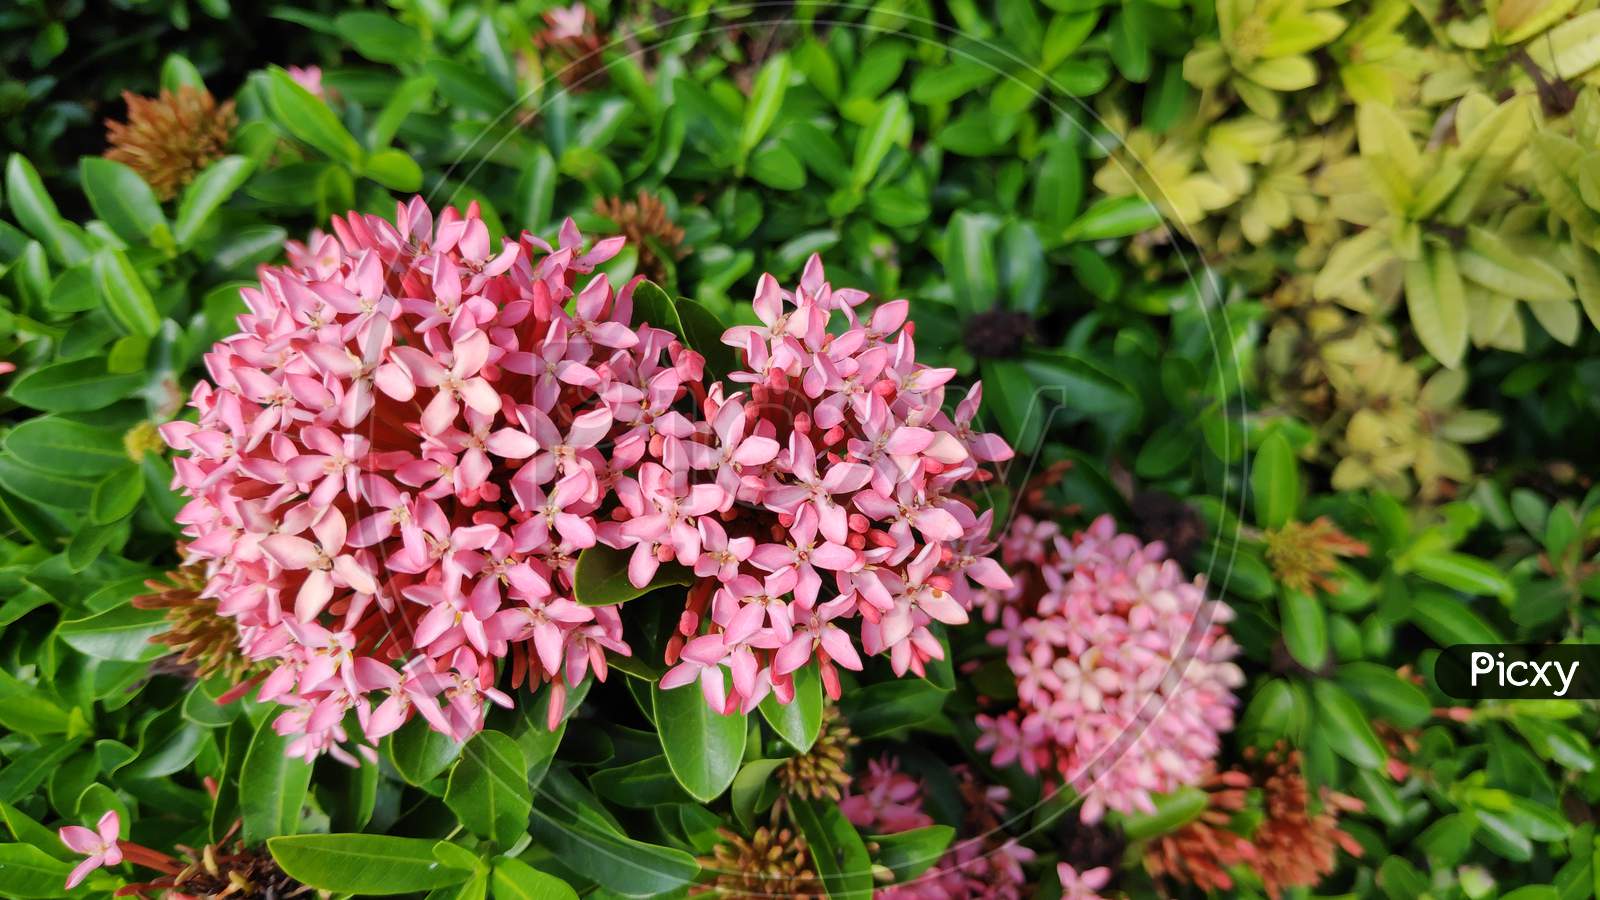 Three colorful Red Flowers of Ixora Coccinea plant with green leaves